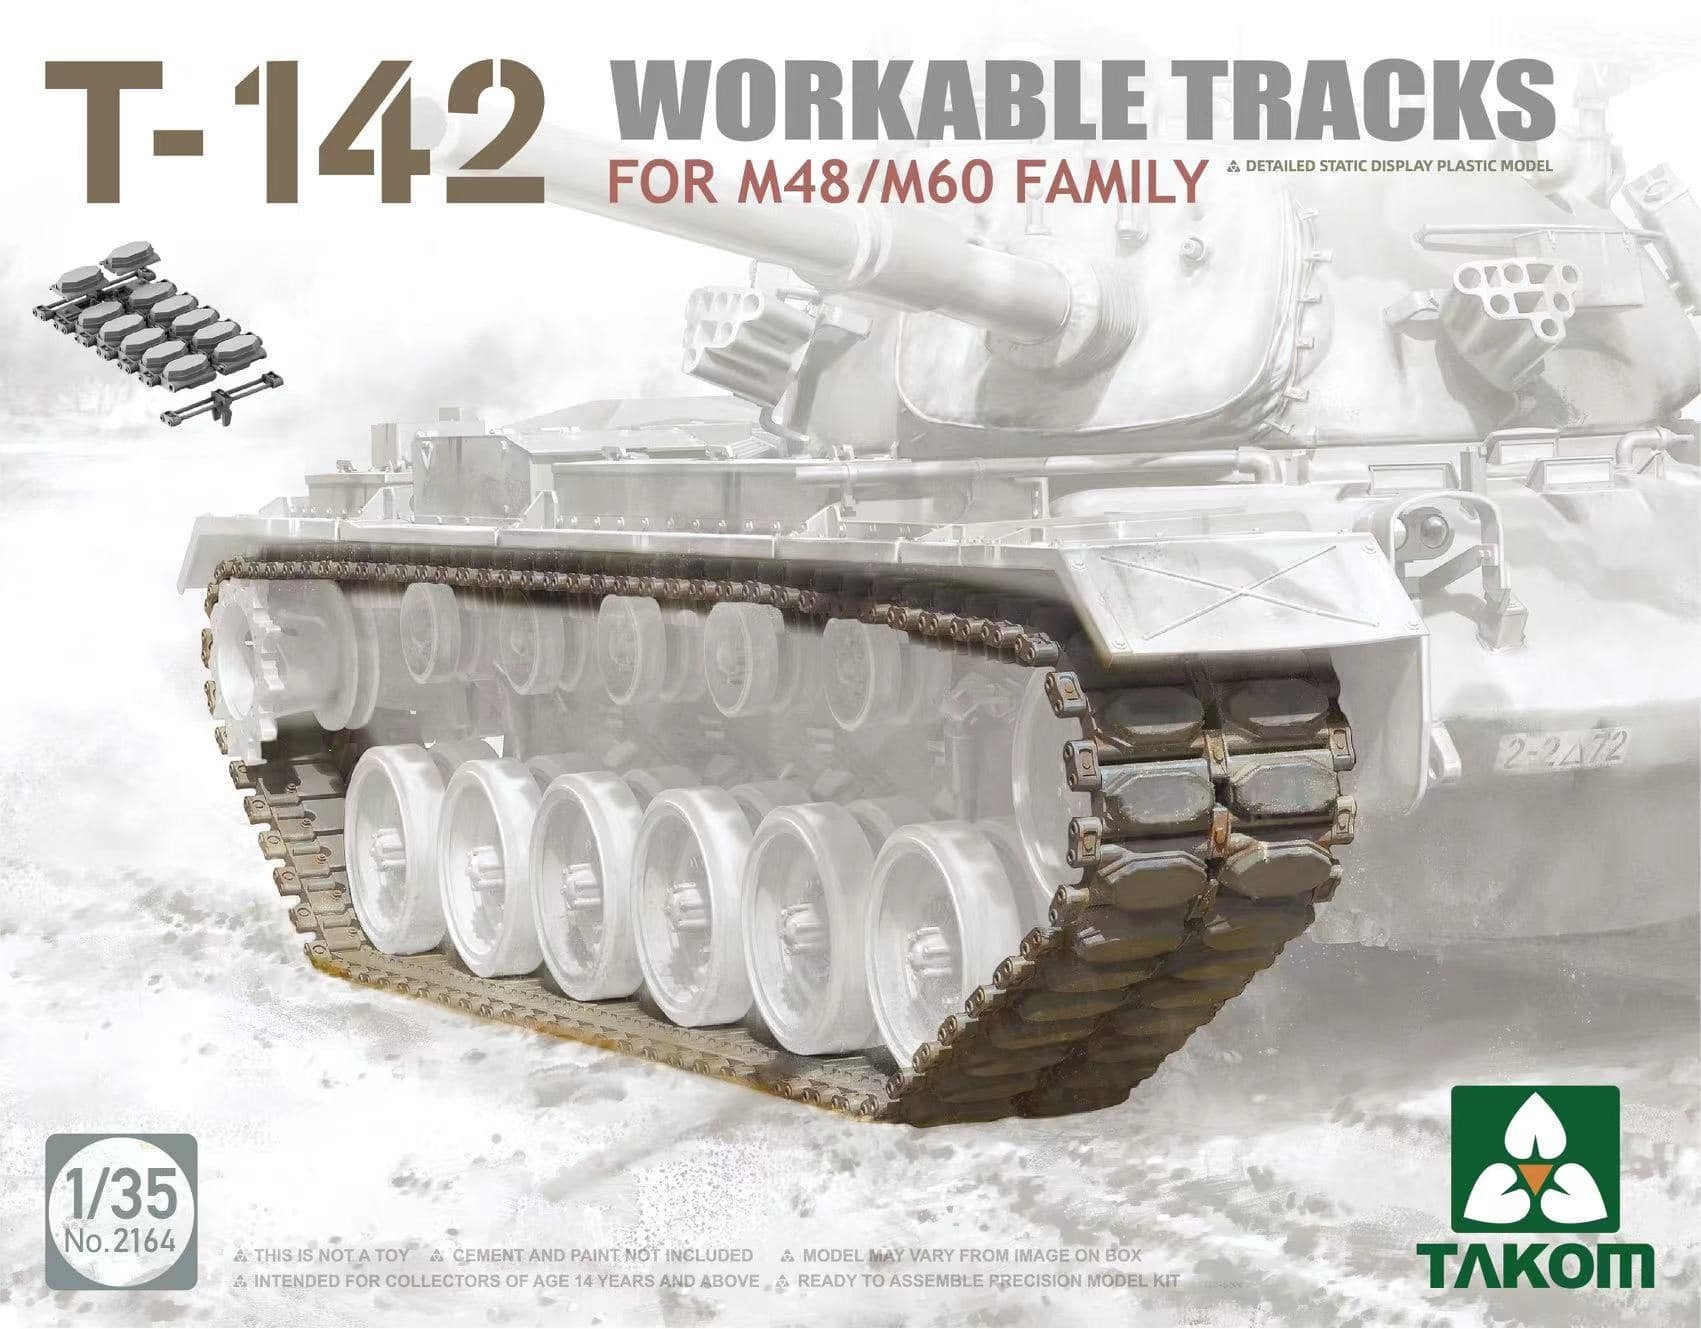 2146 - T-142 Workable Tracks